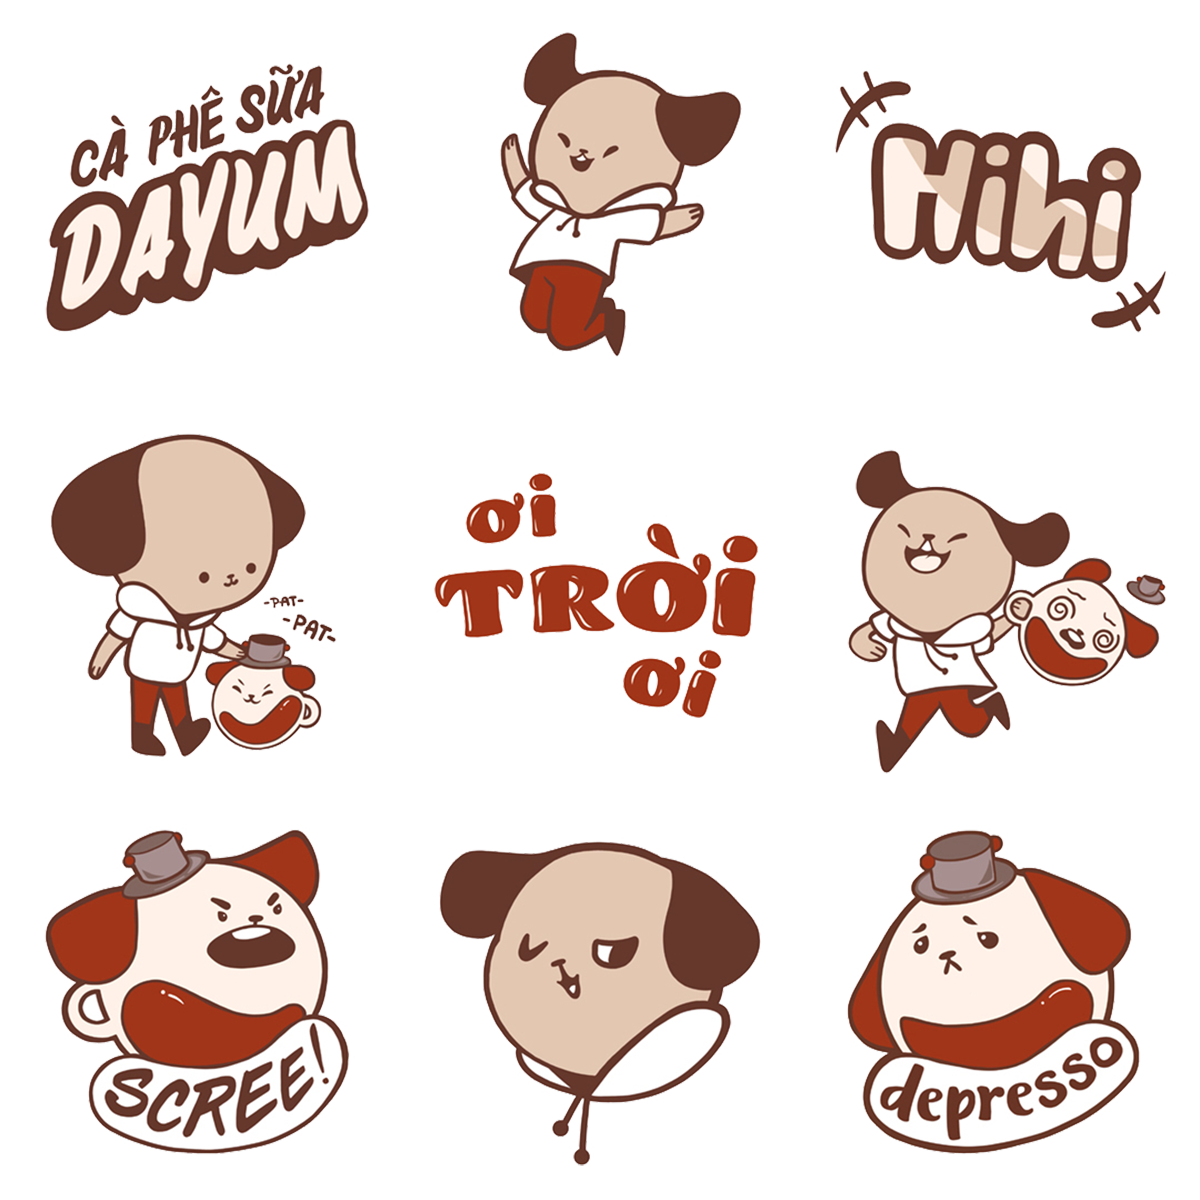 Illustrated marketing logo sheet for coffee or a cafe showing variations of logos of a anime dog and experimental text